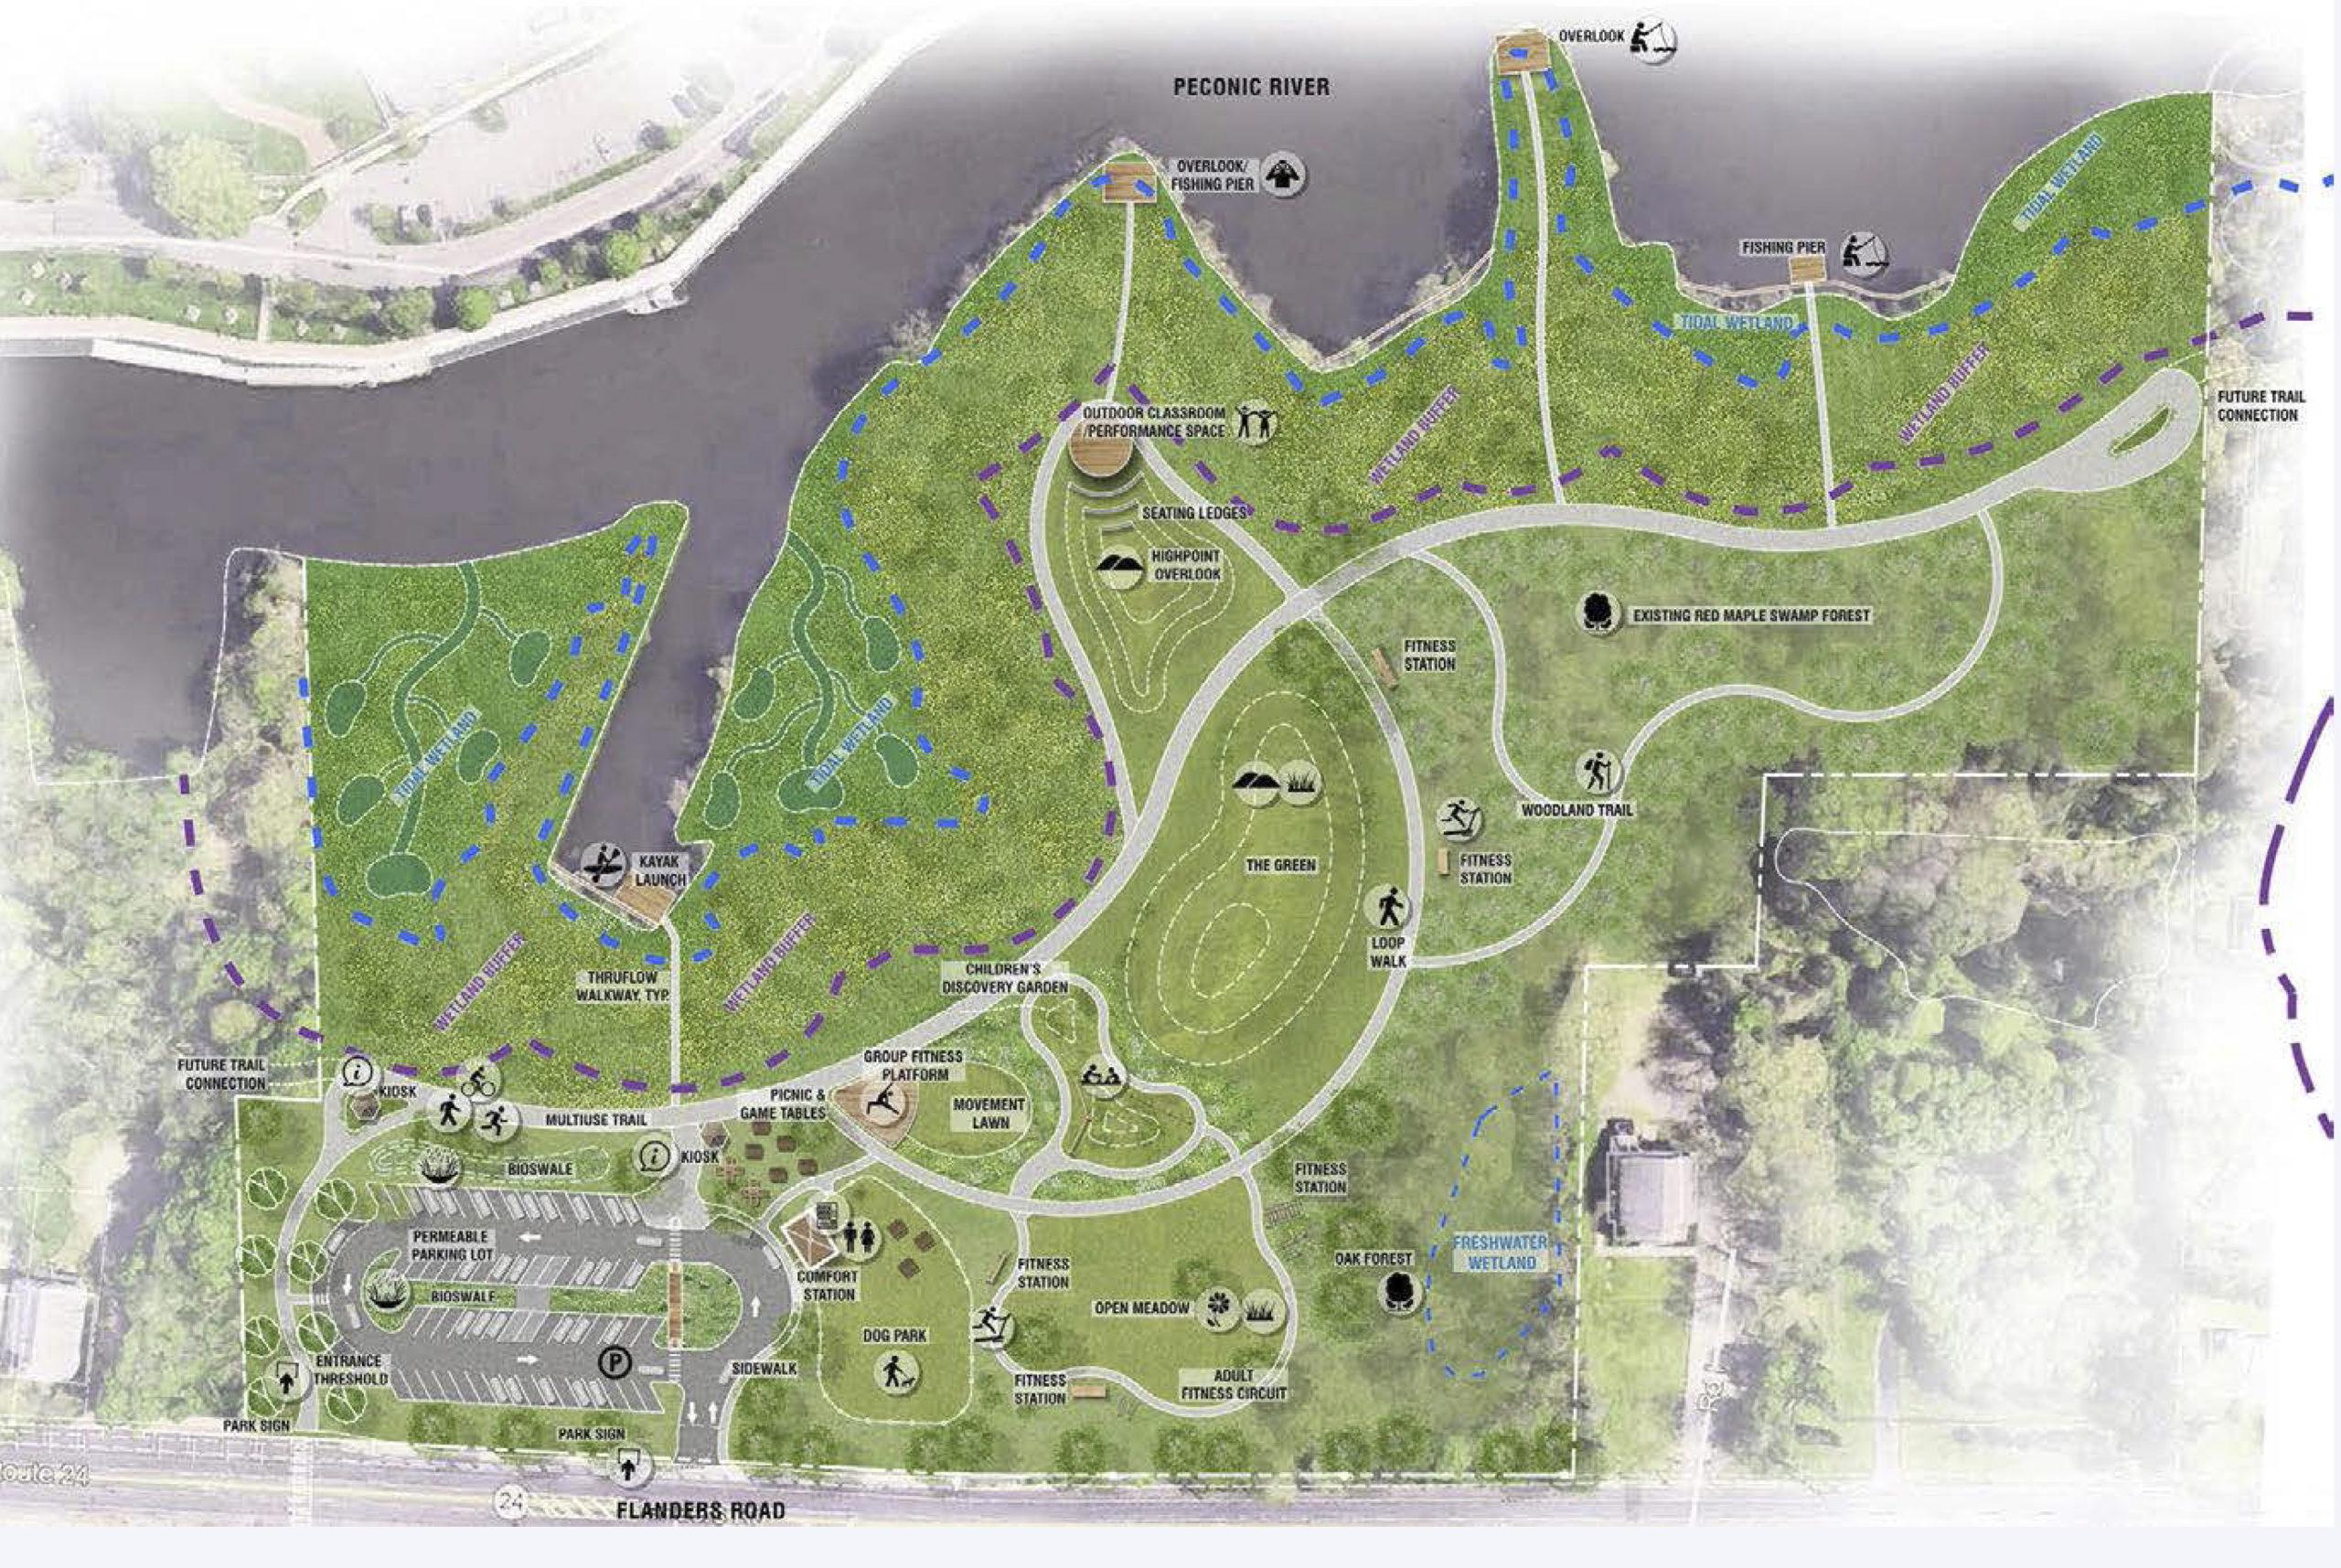 The design of the propsed park in Riverside.